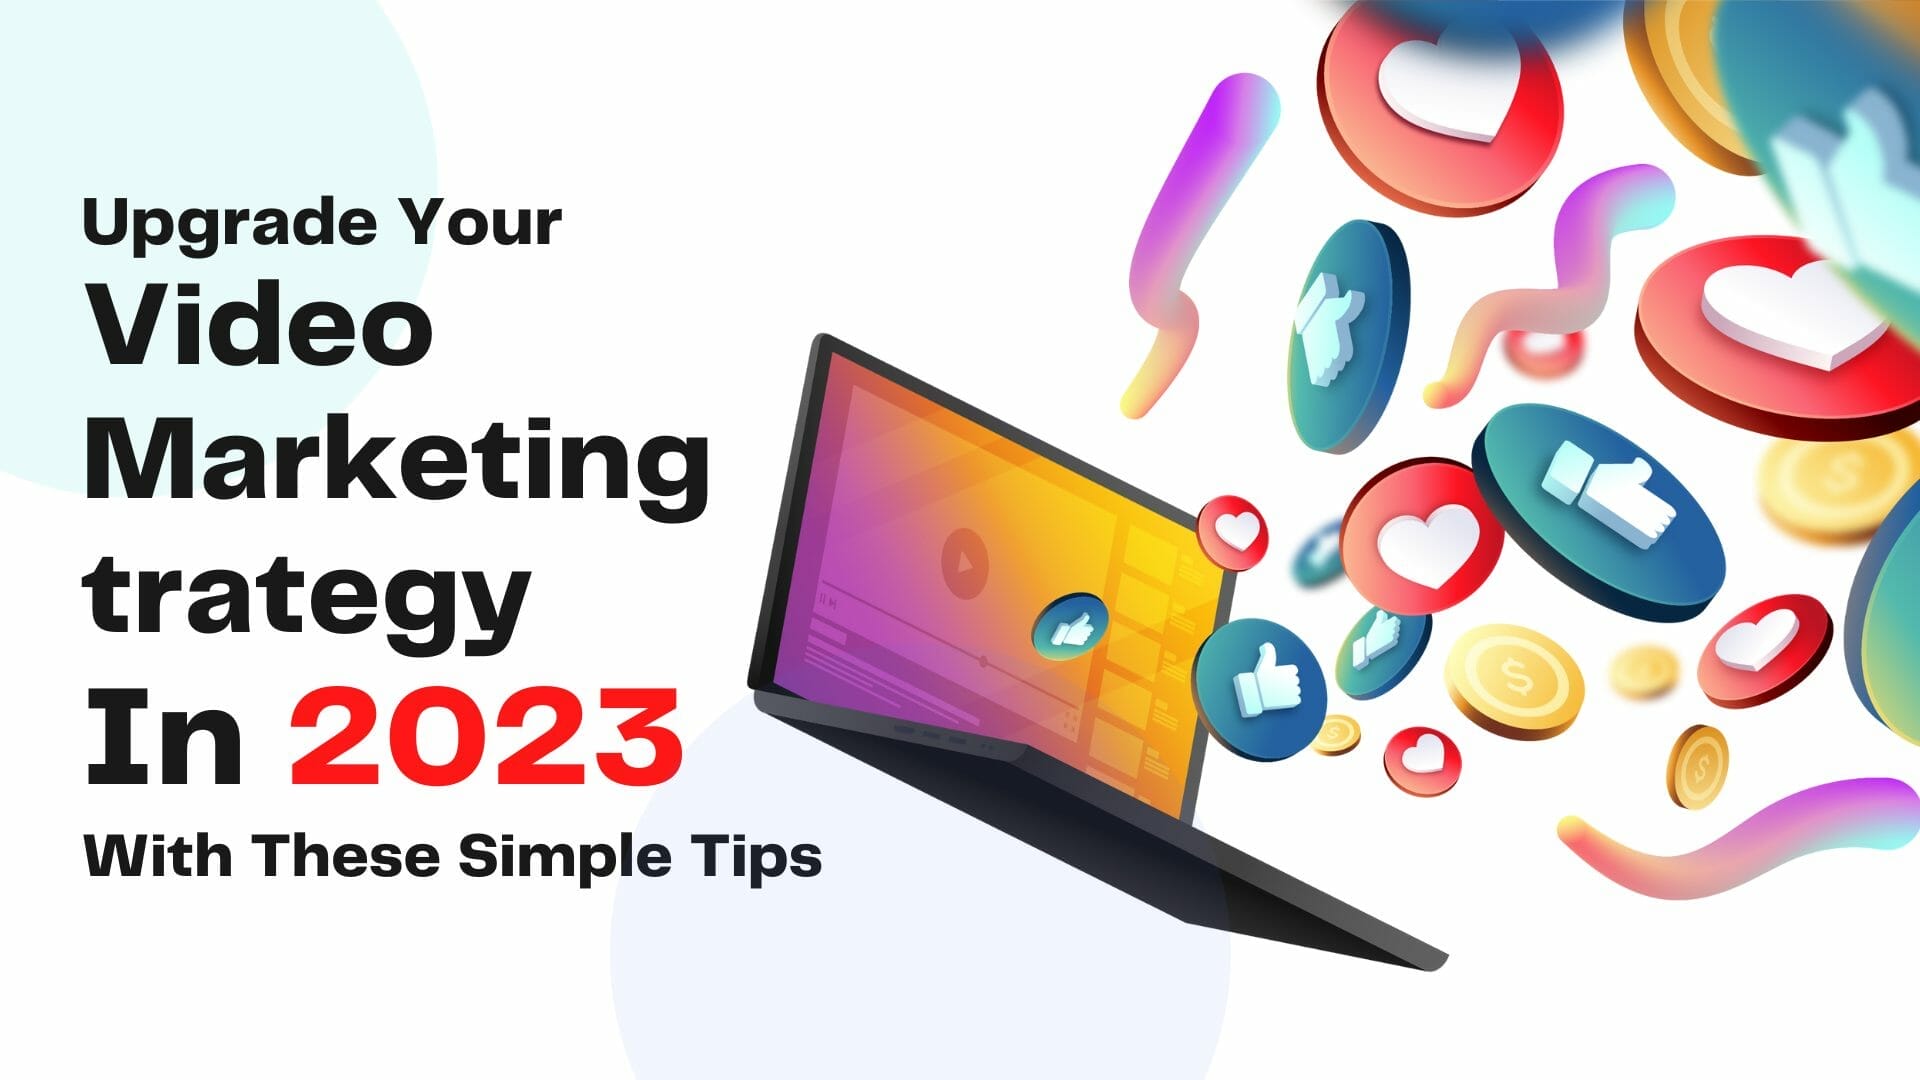 Upgrade Your Video Marketing Strategy In 2023 With These Simple Tips